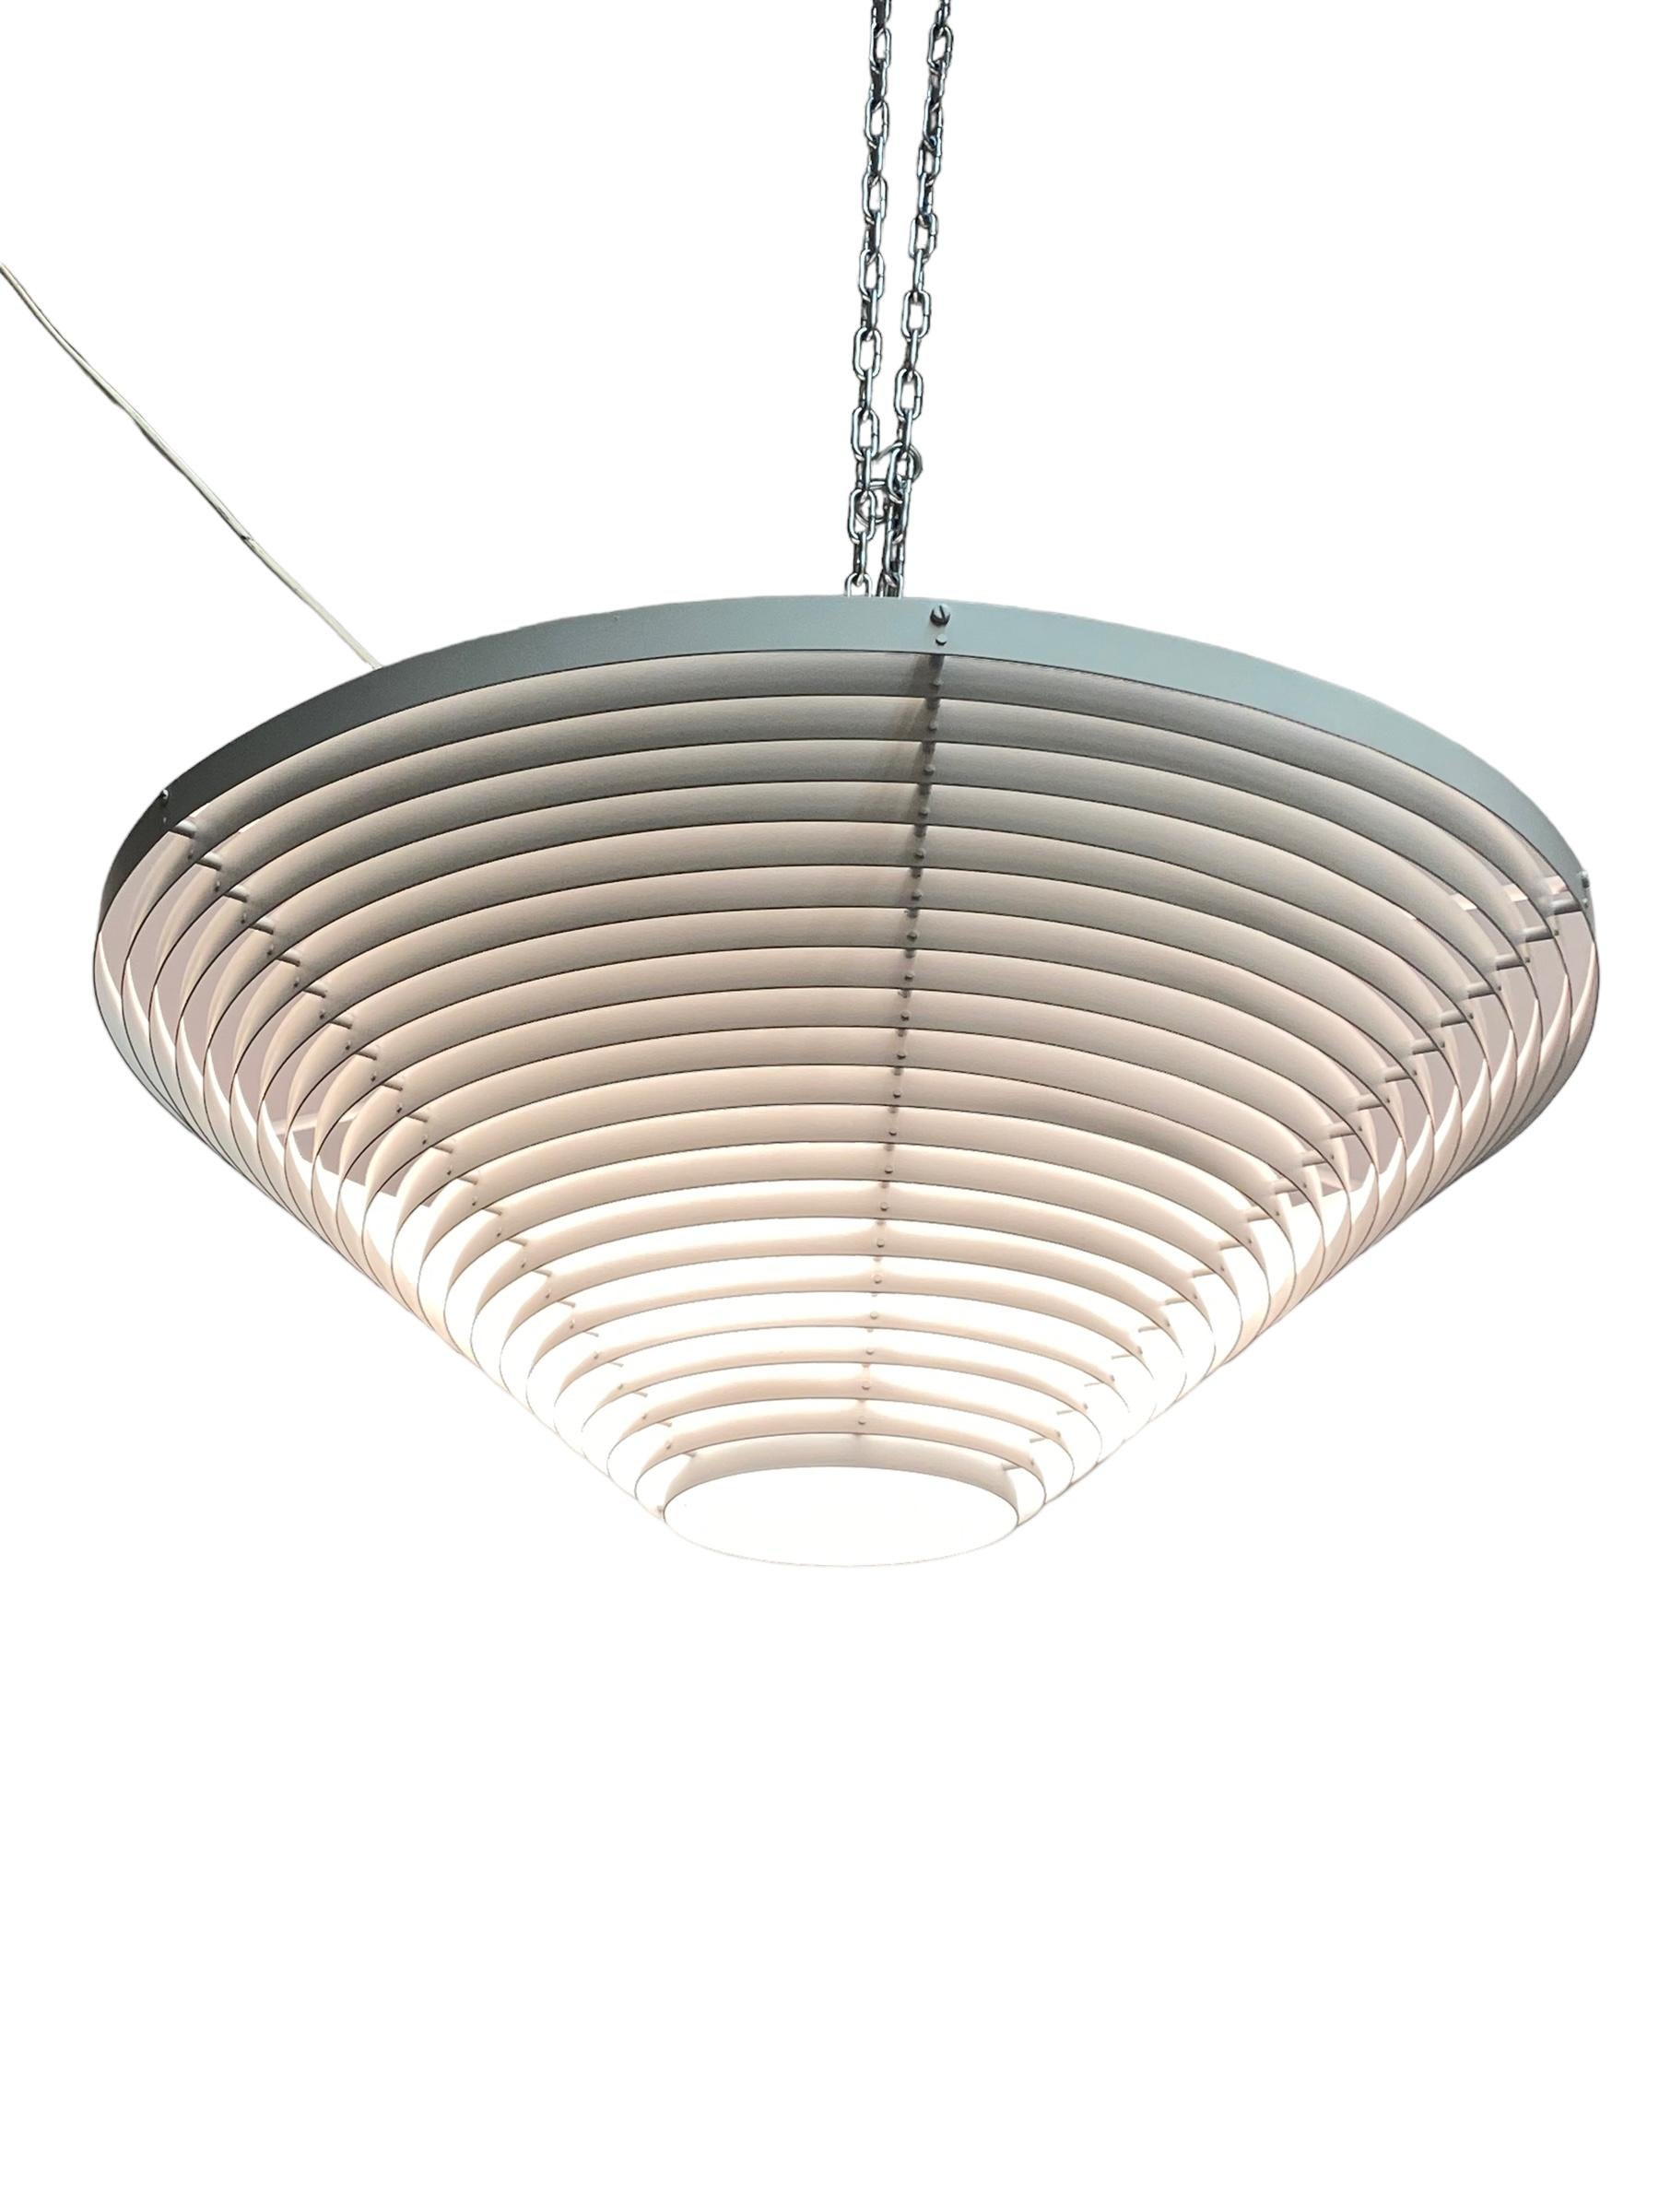 An iconic ceiling pendant model A622, designed by Alvar Aalto in the 1950s, and manufactured by Valaisinpaja Oy in Finland in the 1970s. In line with all Aalto furniture and lighting designs, this piece is very minimalistic and functional. The